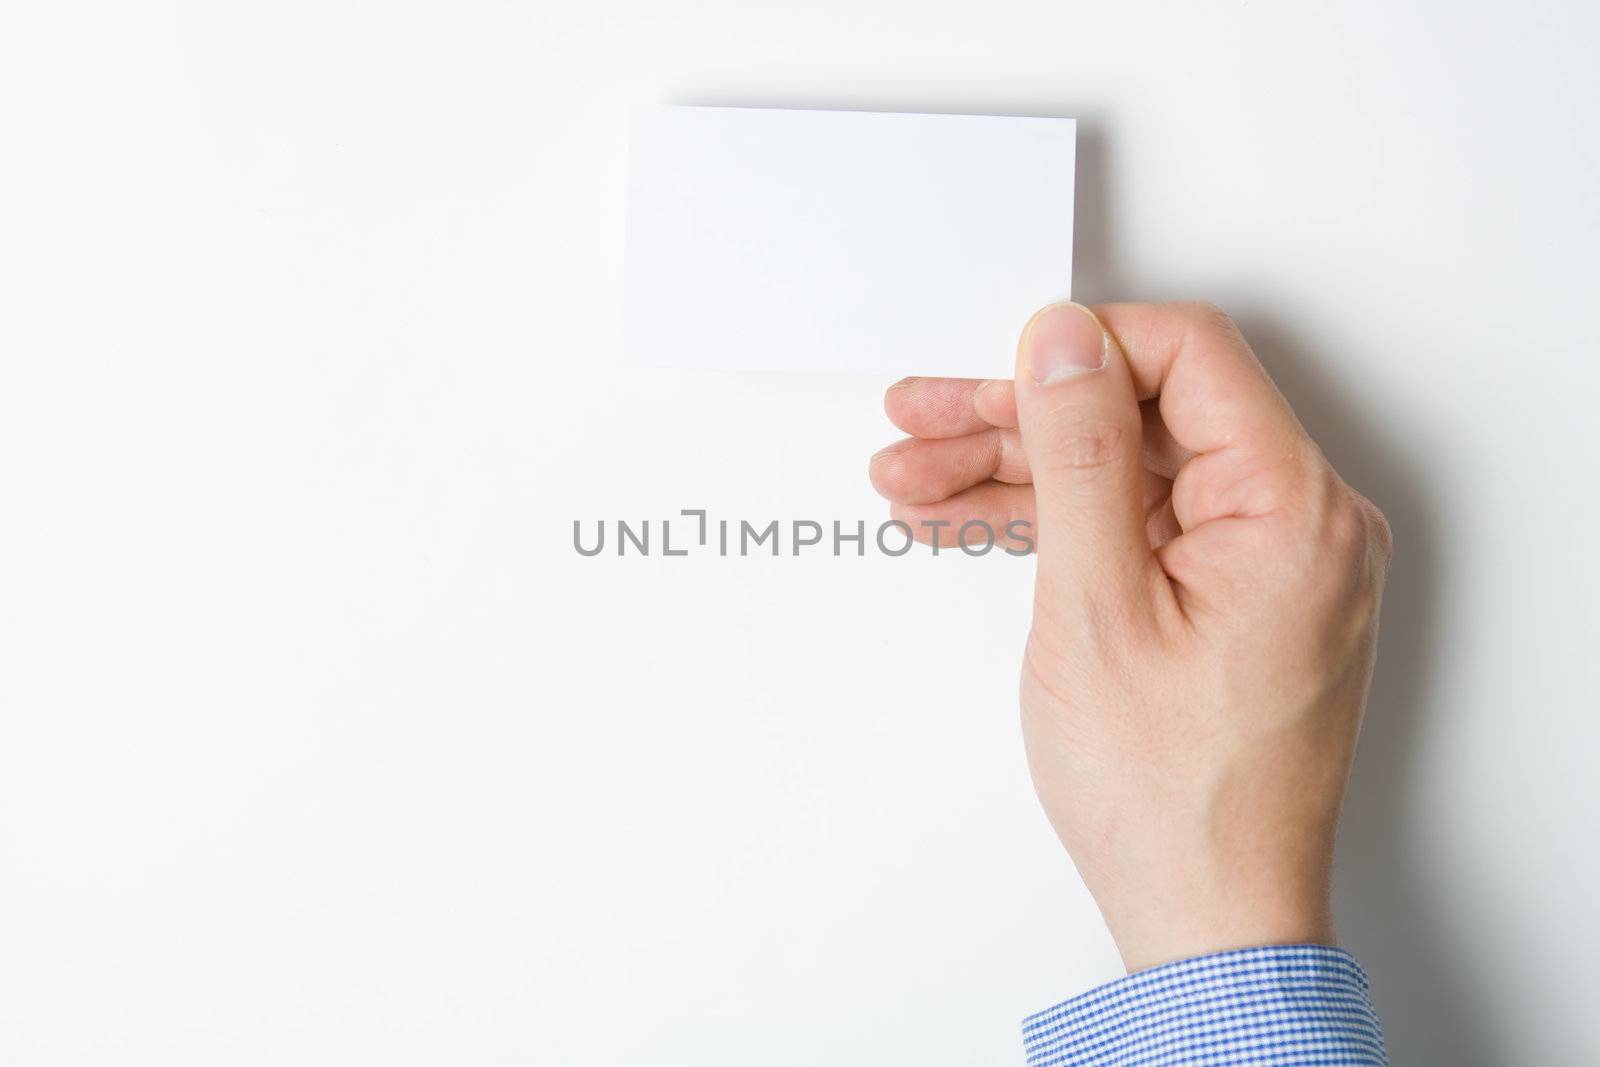 Man or person presenting a business card to introduce himself